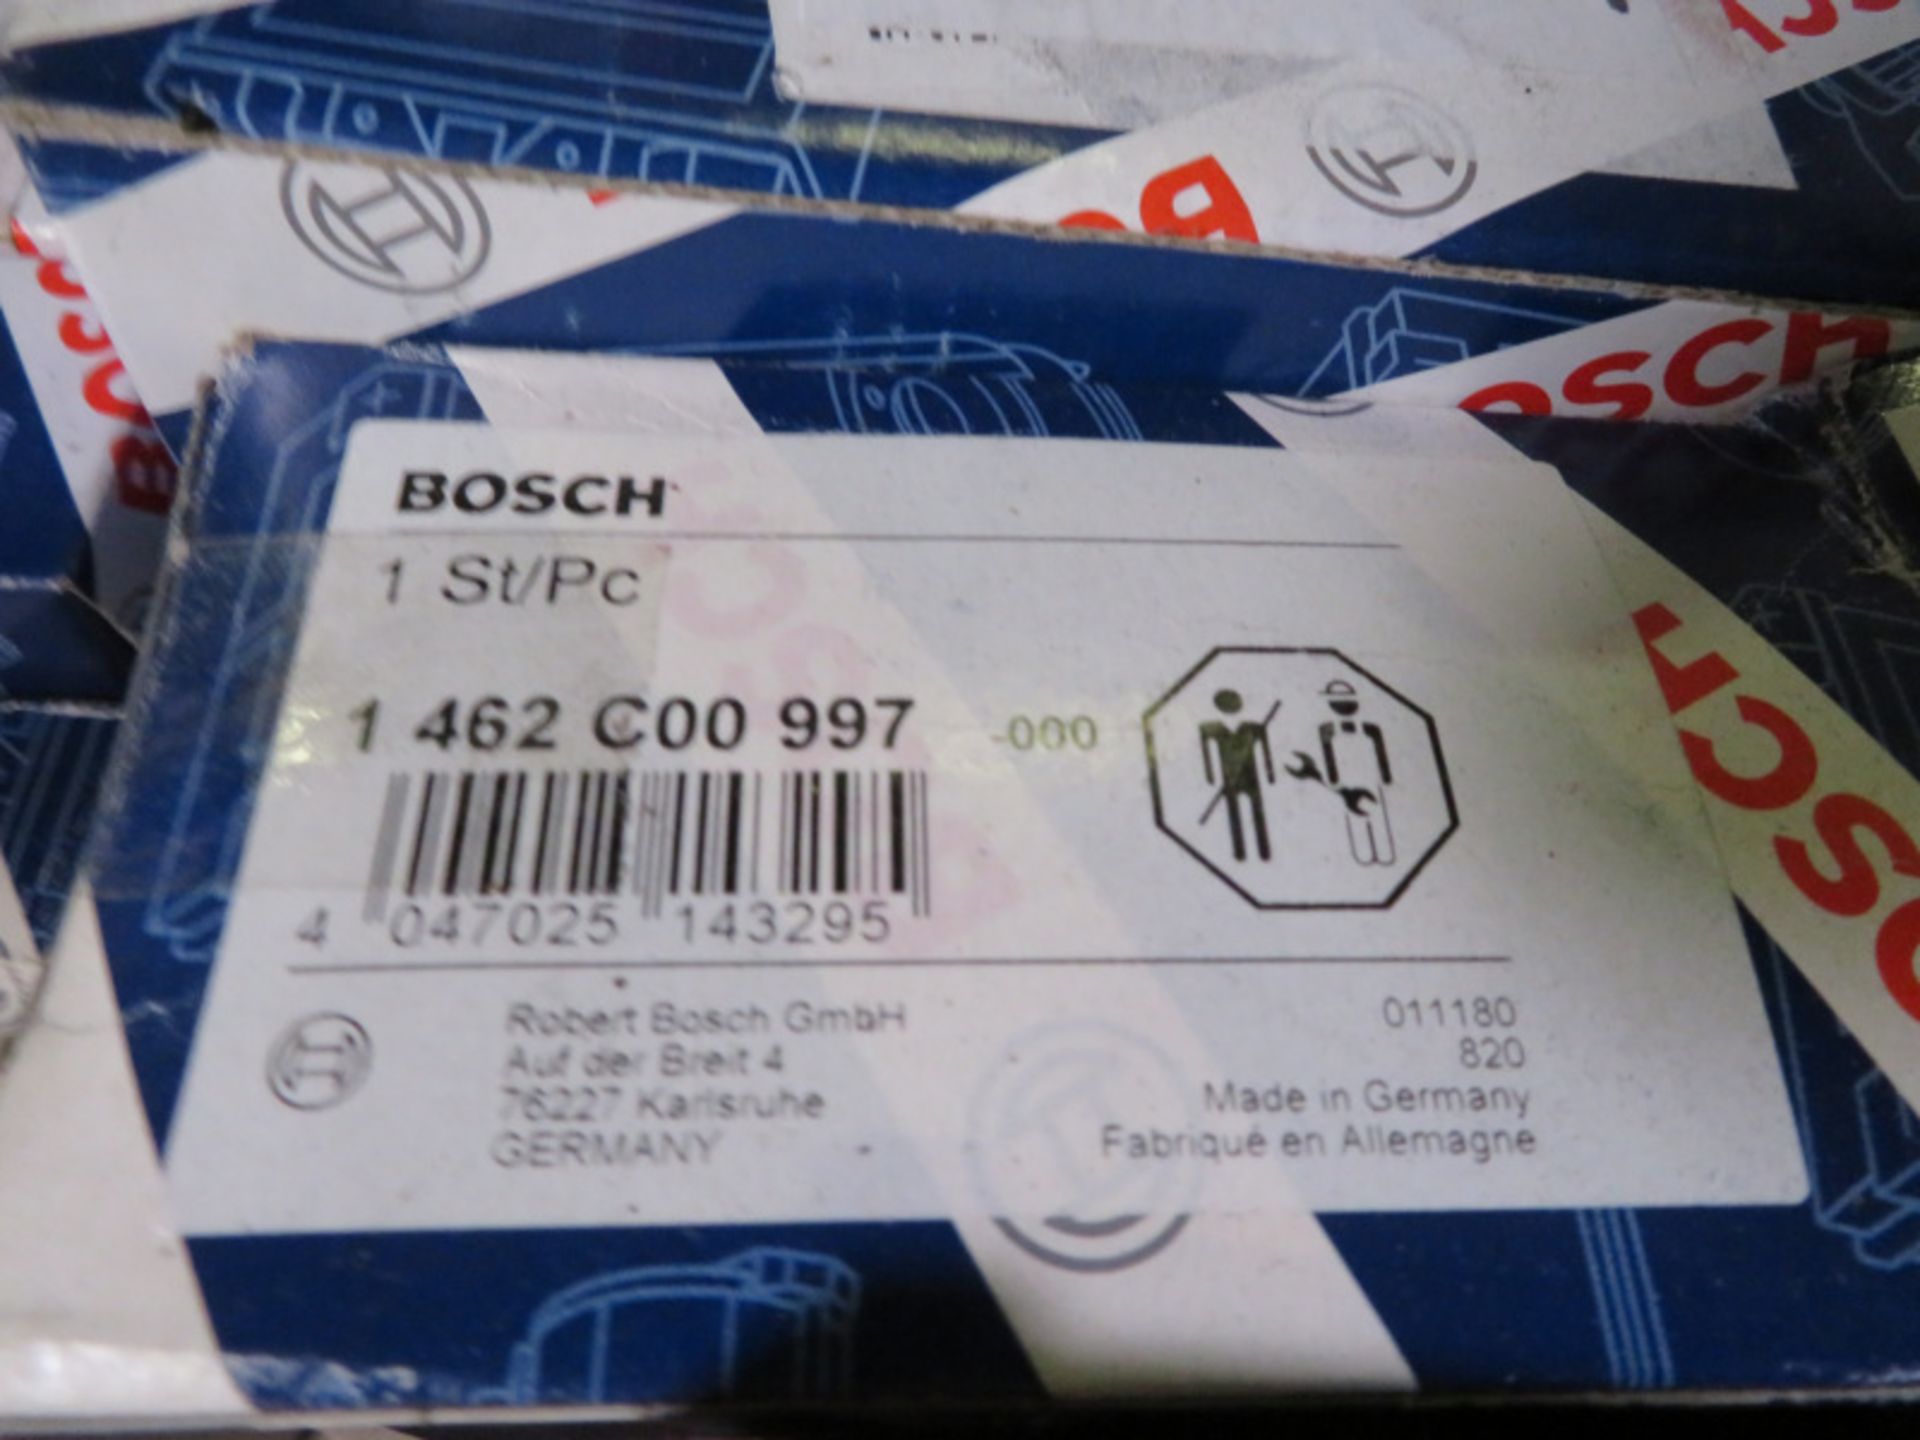 Vehicle parts - Bosch, Delphi, Schaeffler, SKF, ATE - see pictures for models and types - Image 4 of 10